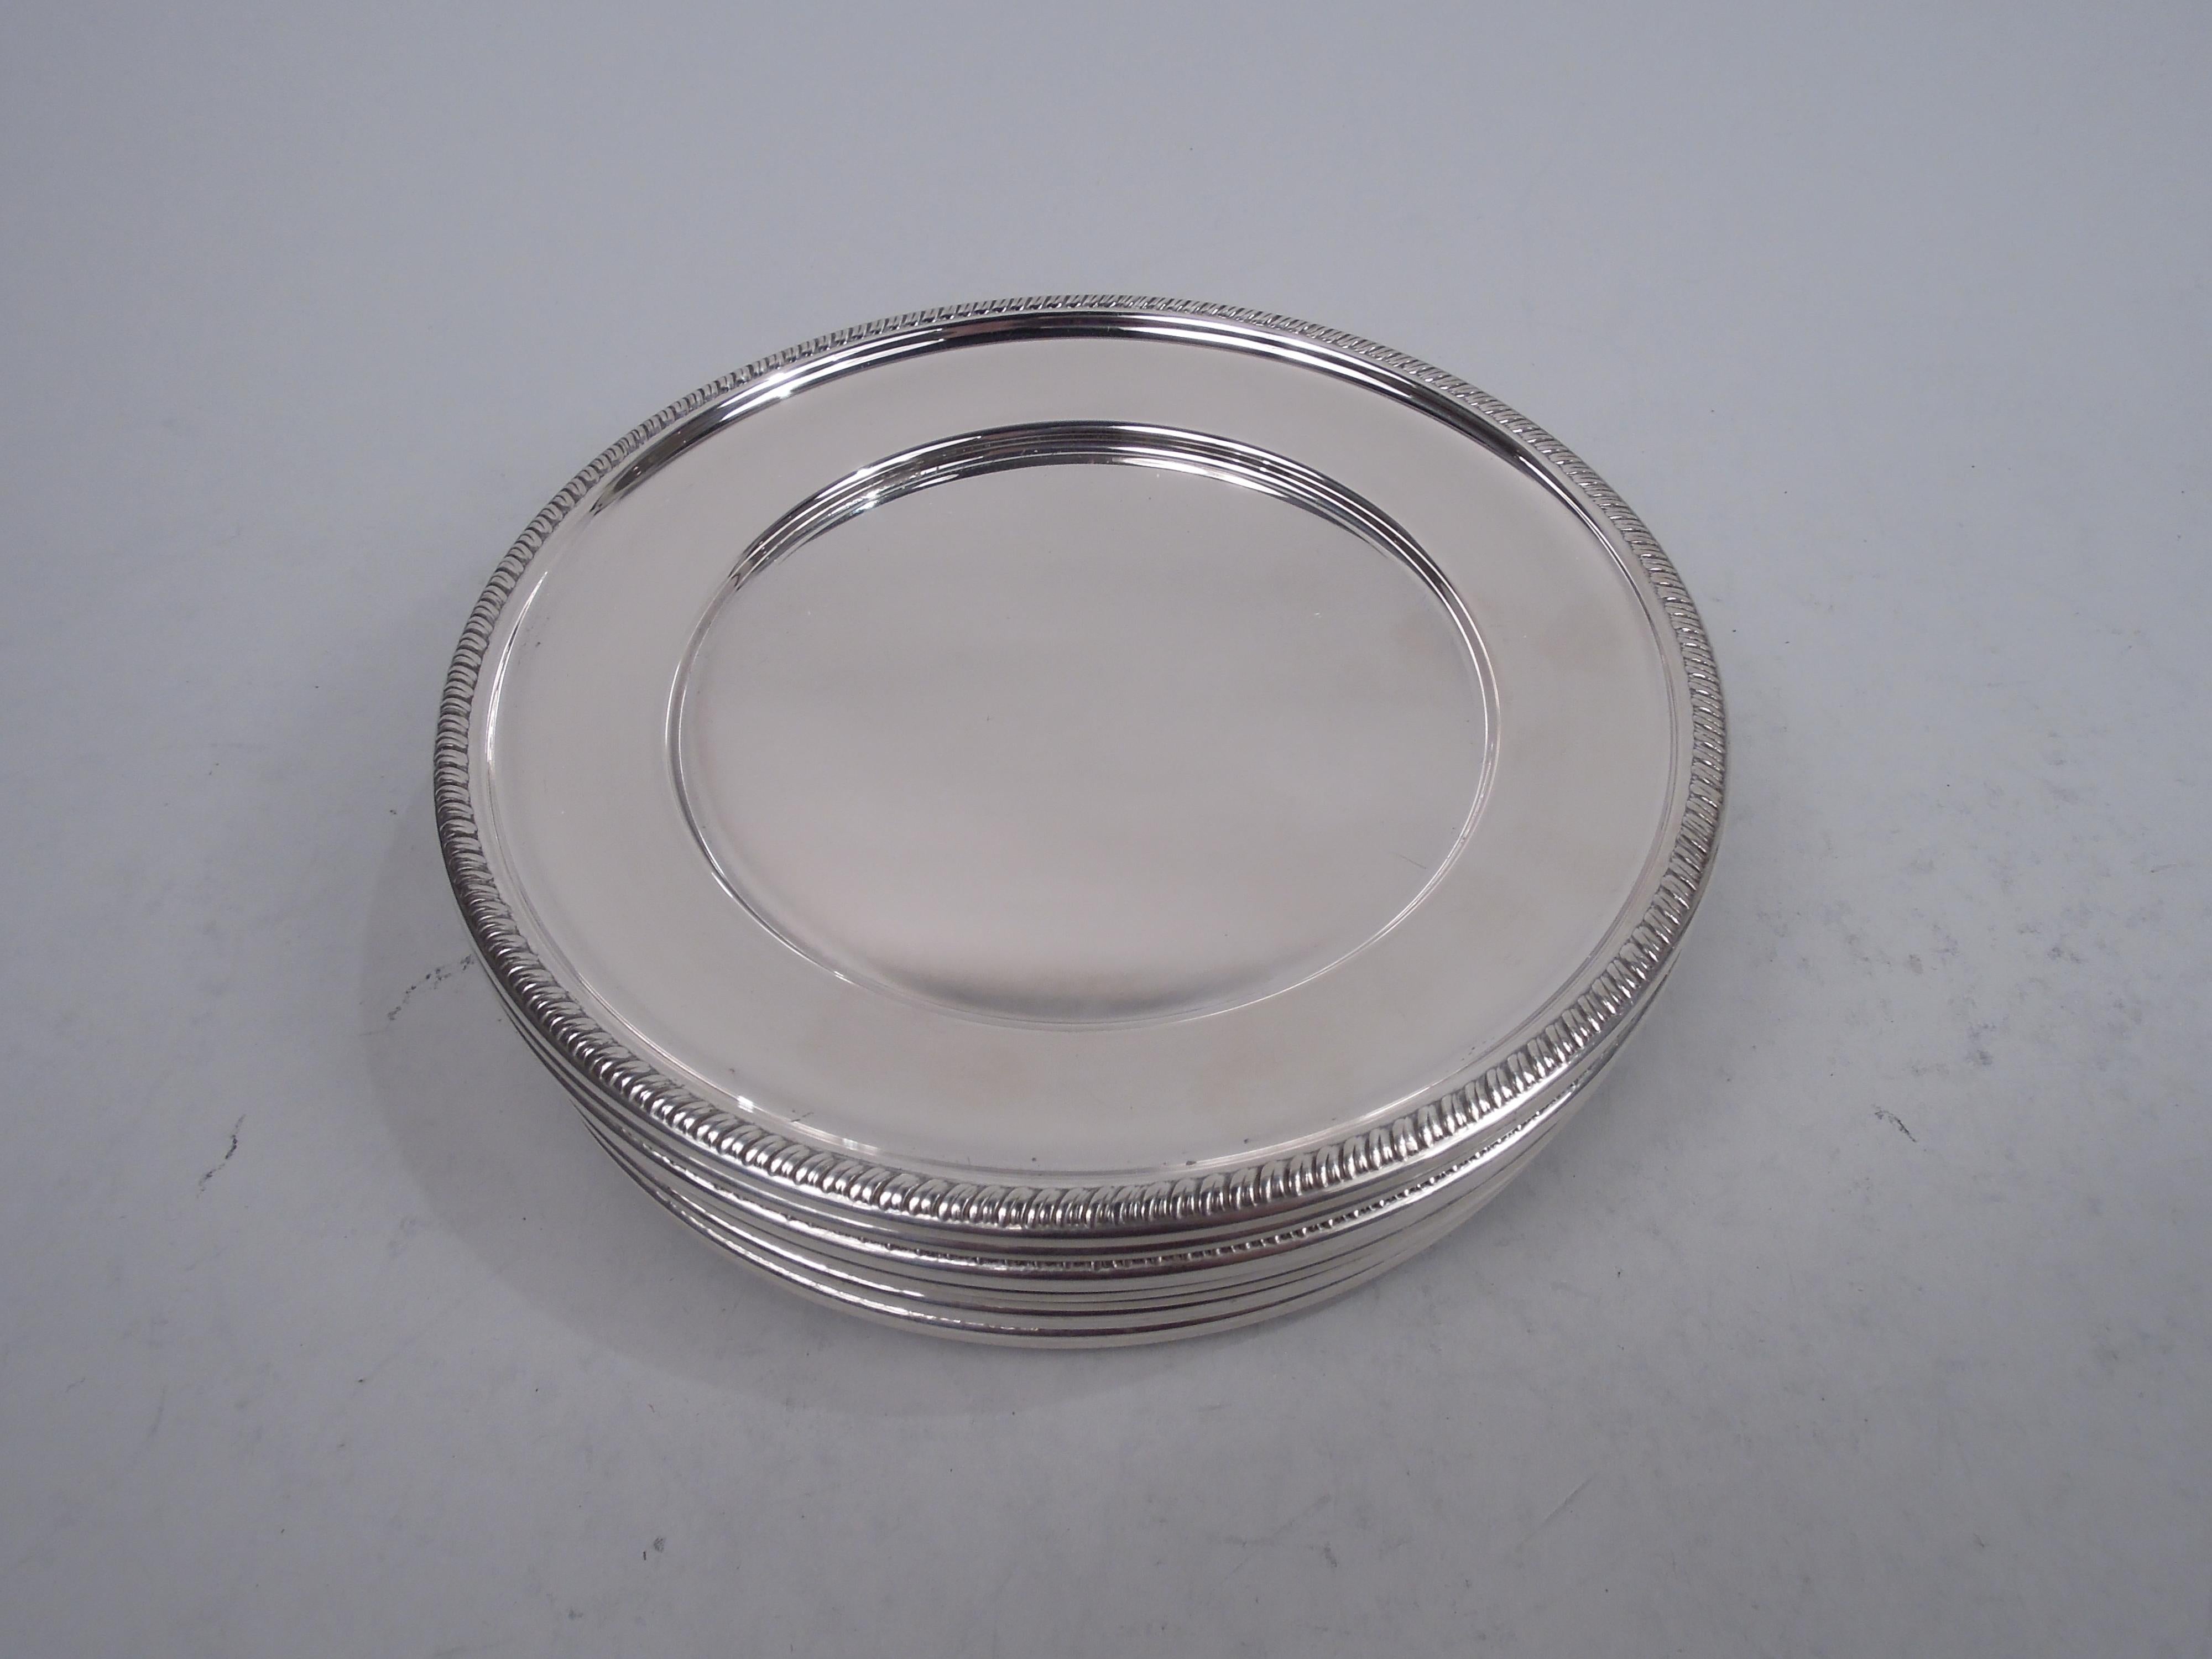 Set of 12 traditional Georgian sterling silver bread and butter plates. Each: Well with tapering shoulder and embossed gadrooned rim. Fully marked including stamp for Hunt Silver Co., a maker active in Chicago and New York in the 1930s-40s, and no.